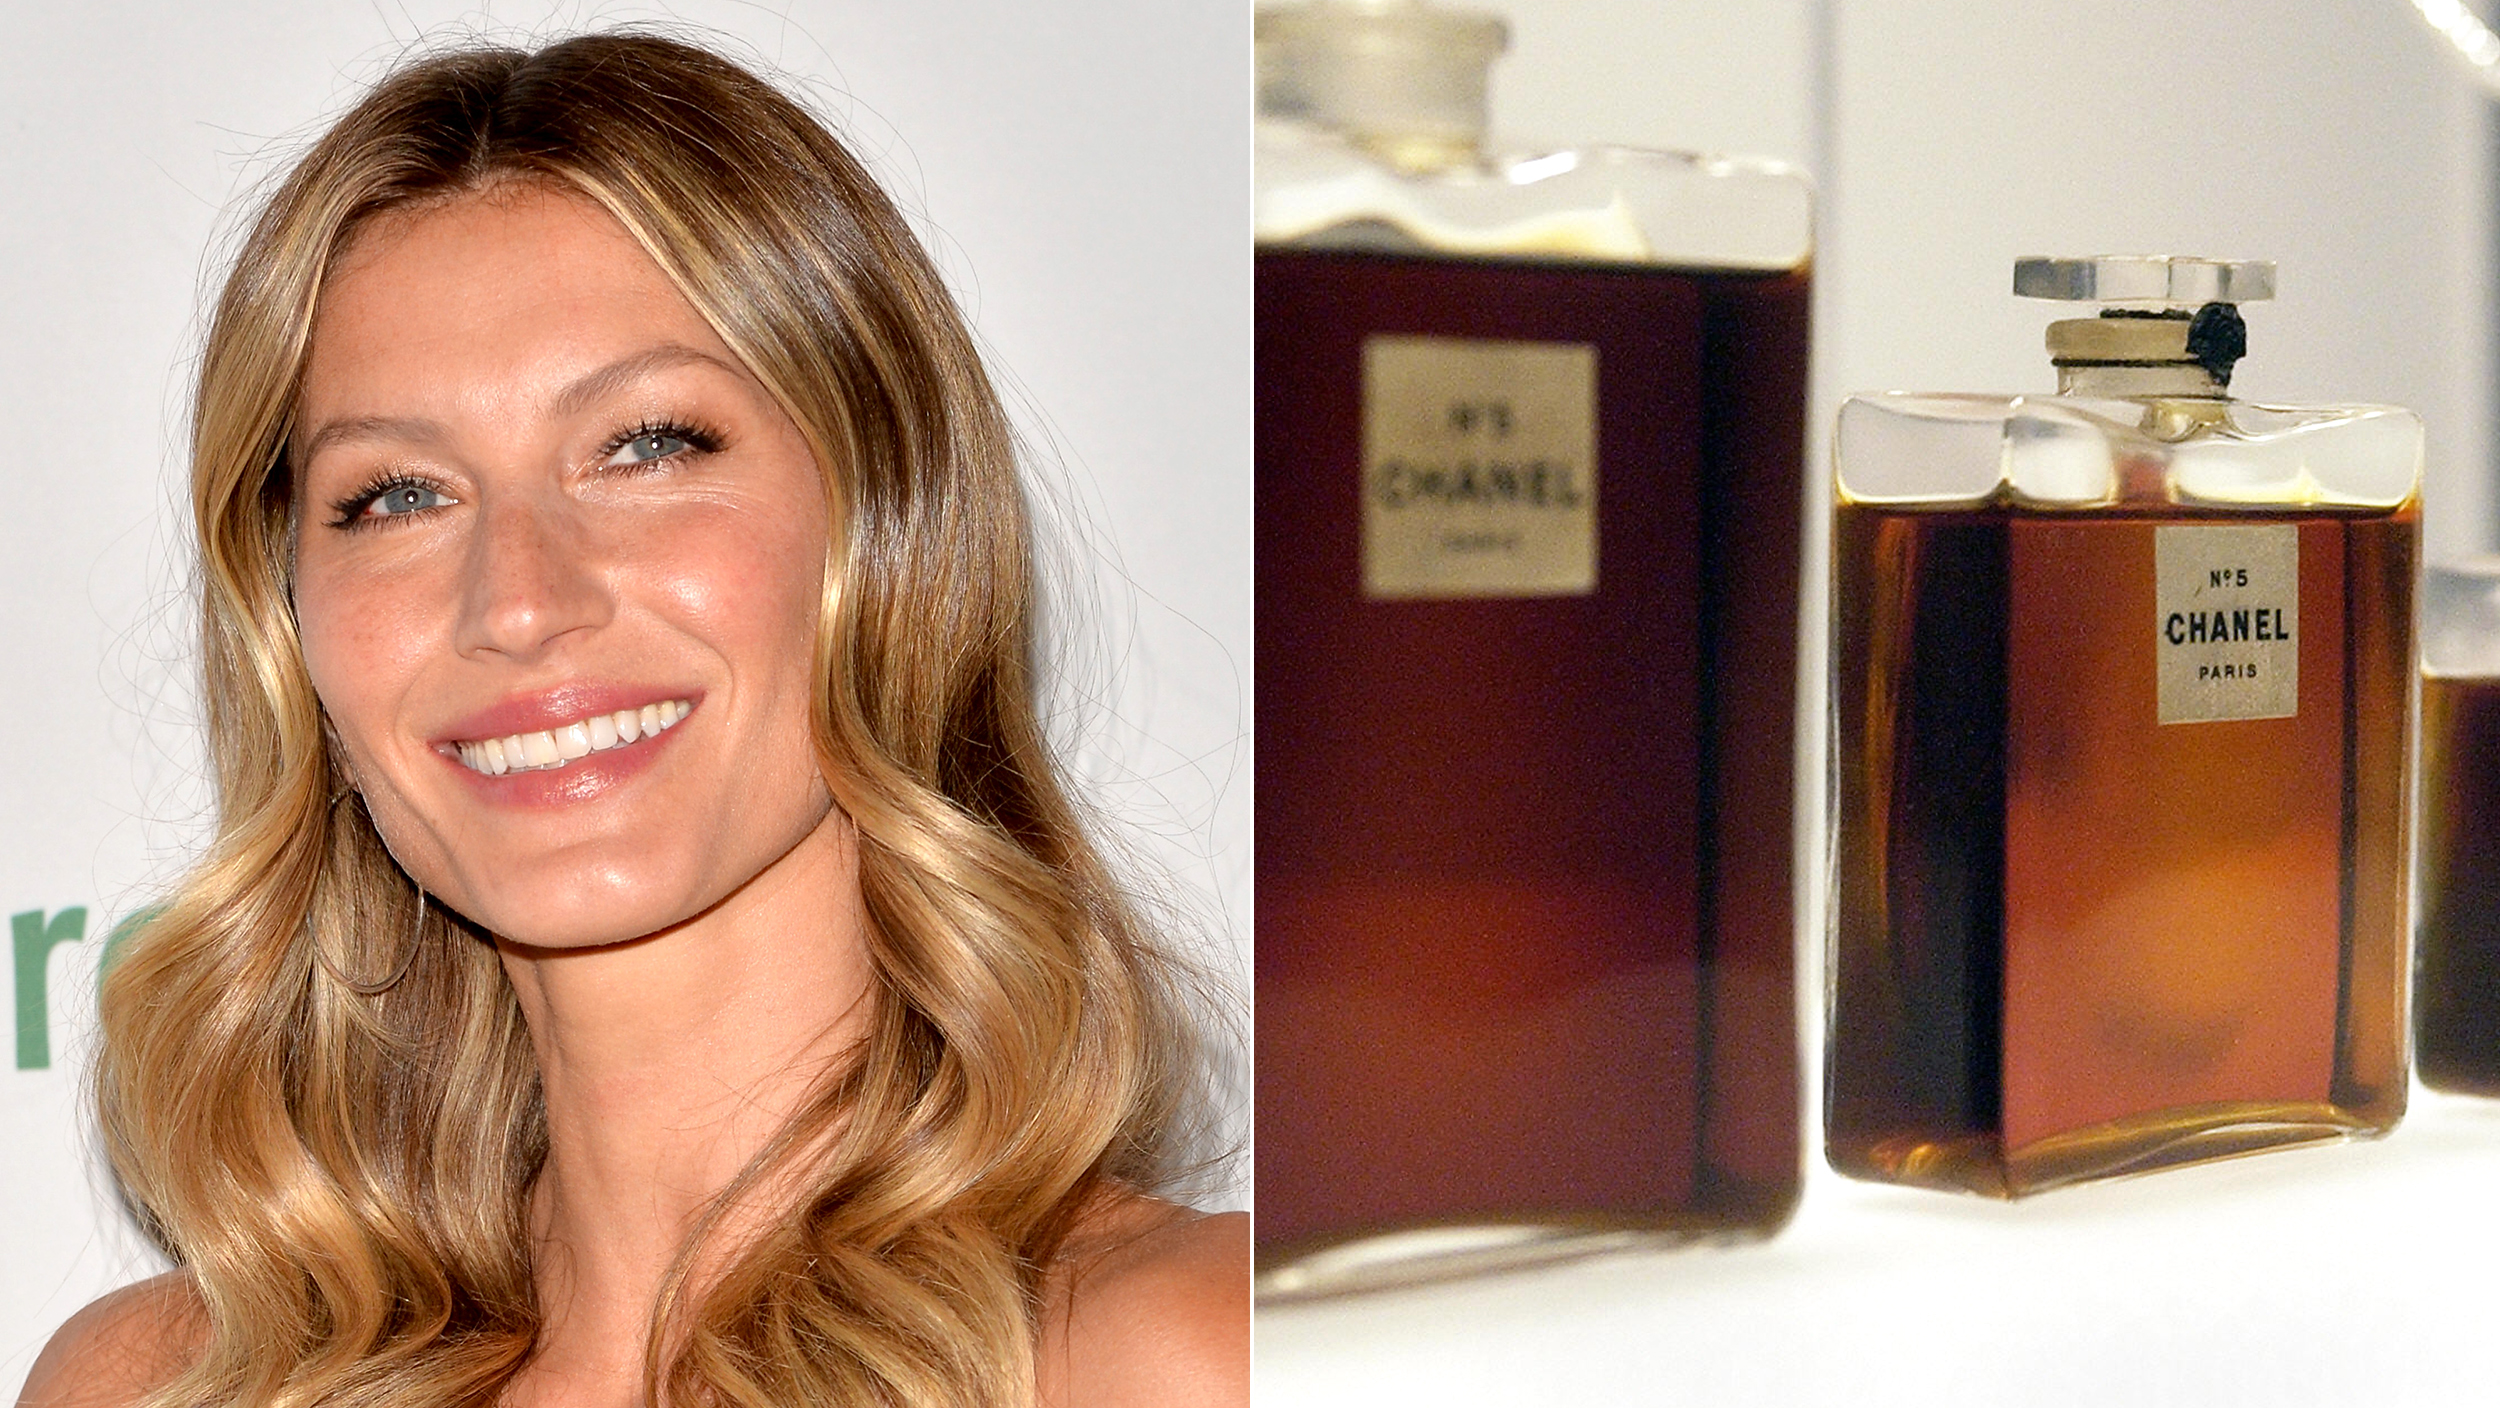 Gisele Bundchen named the new face of Chanel No. 5